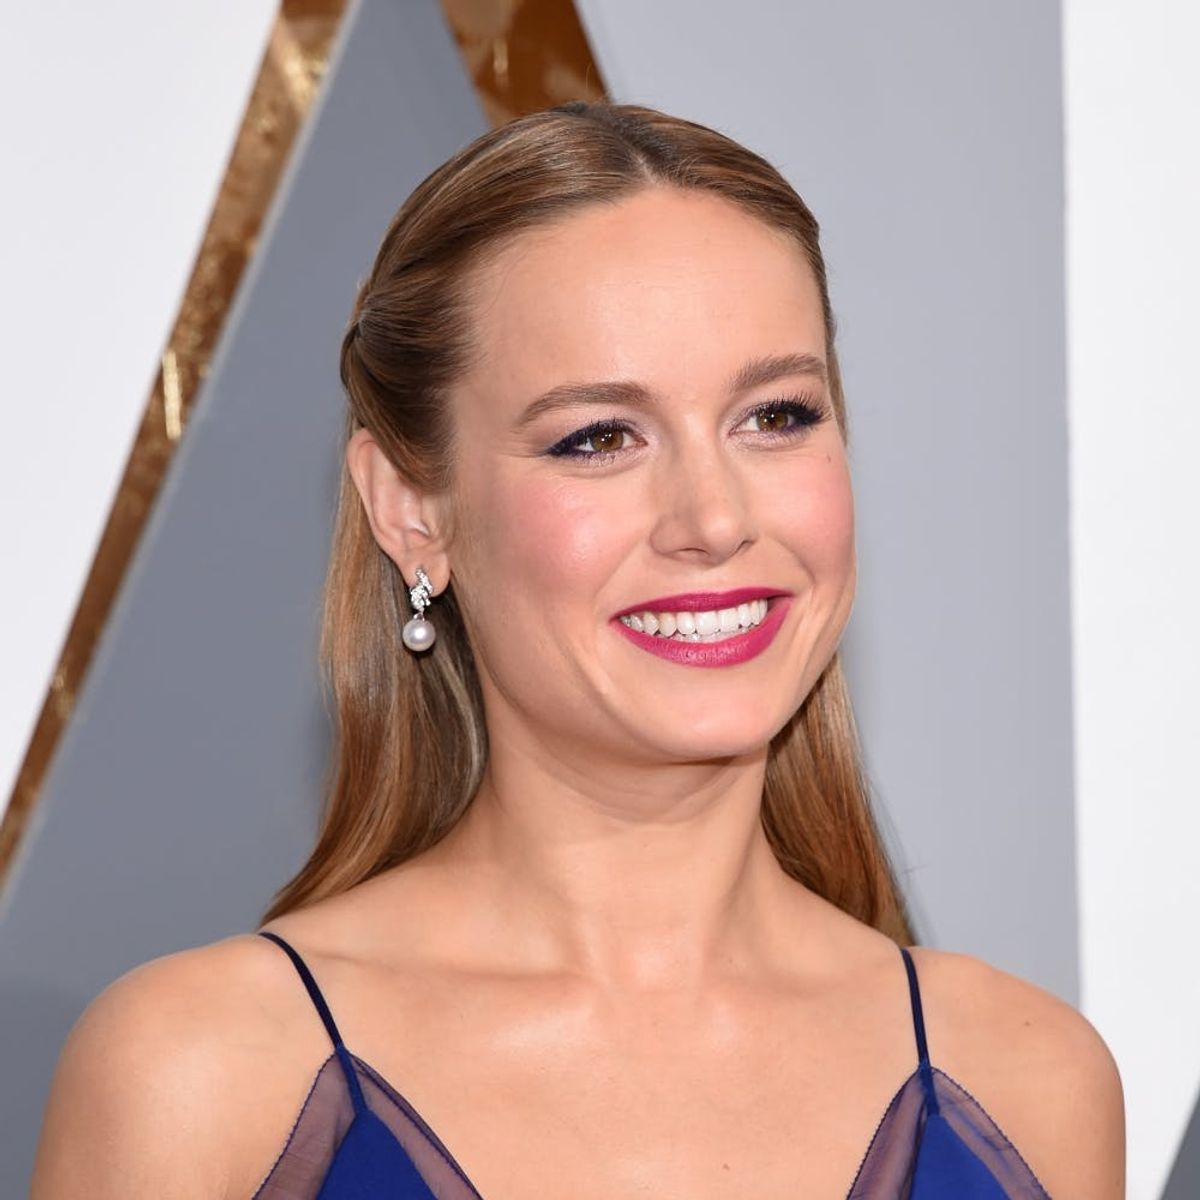 Brie Larson Is Engaged + Take a Peek at Her Ring!